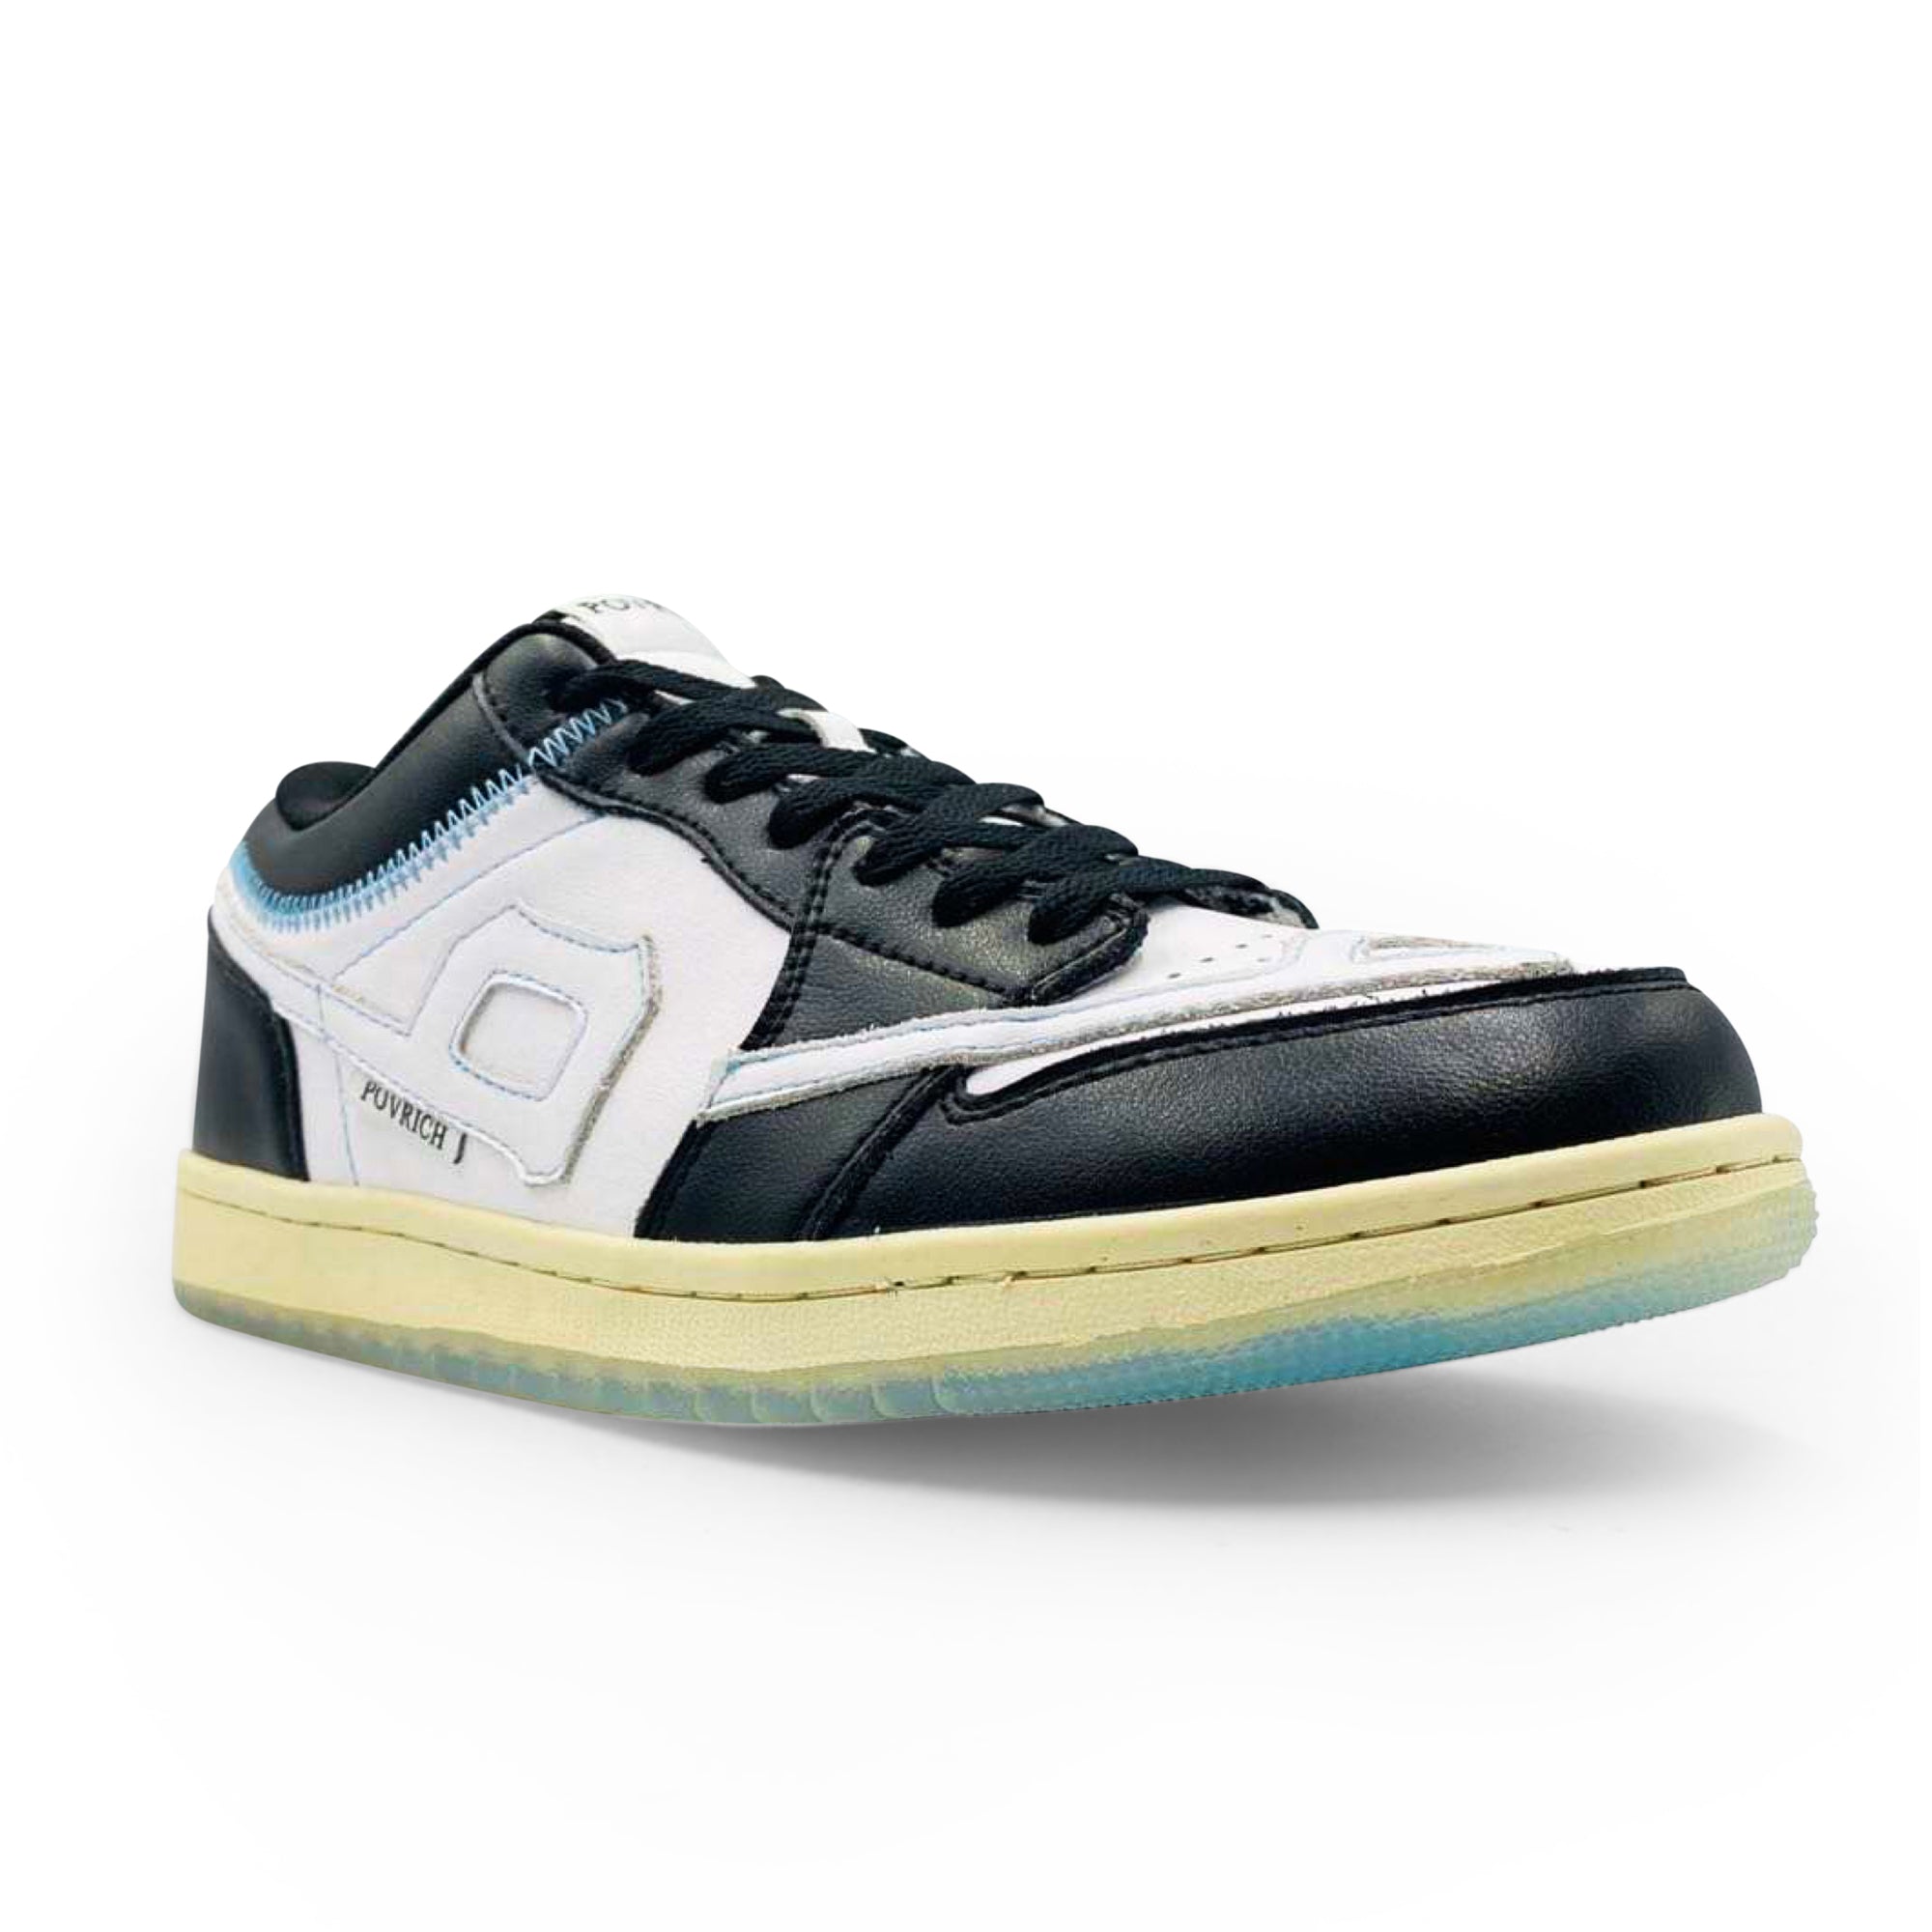 Custom Black Ice Lows sneakers with a sleek low-top design and high-quality materials, available in men's, women's, and youth sizes for a unique and stylish addition to any outfit.